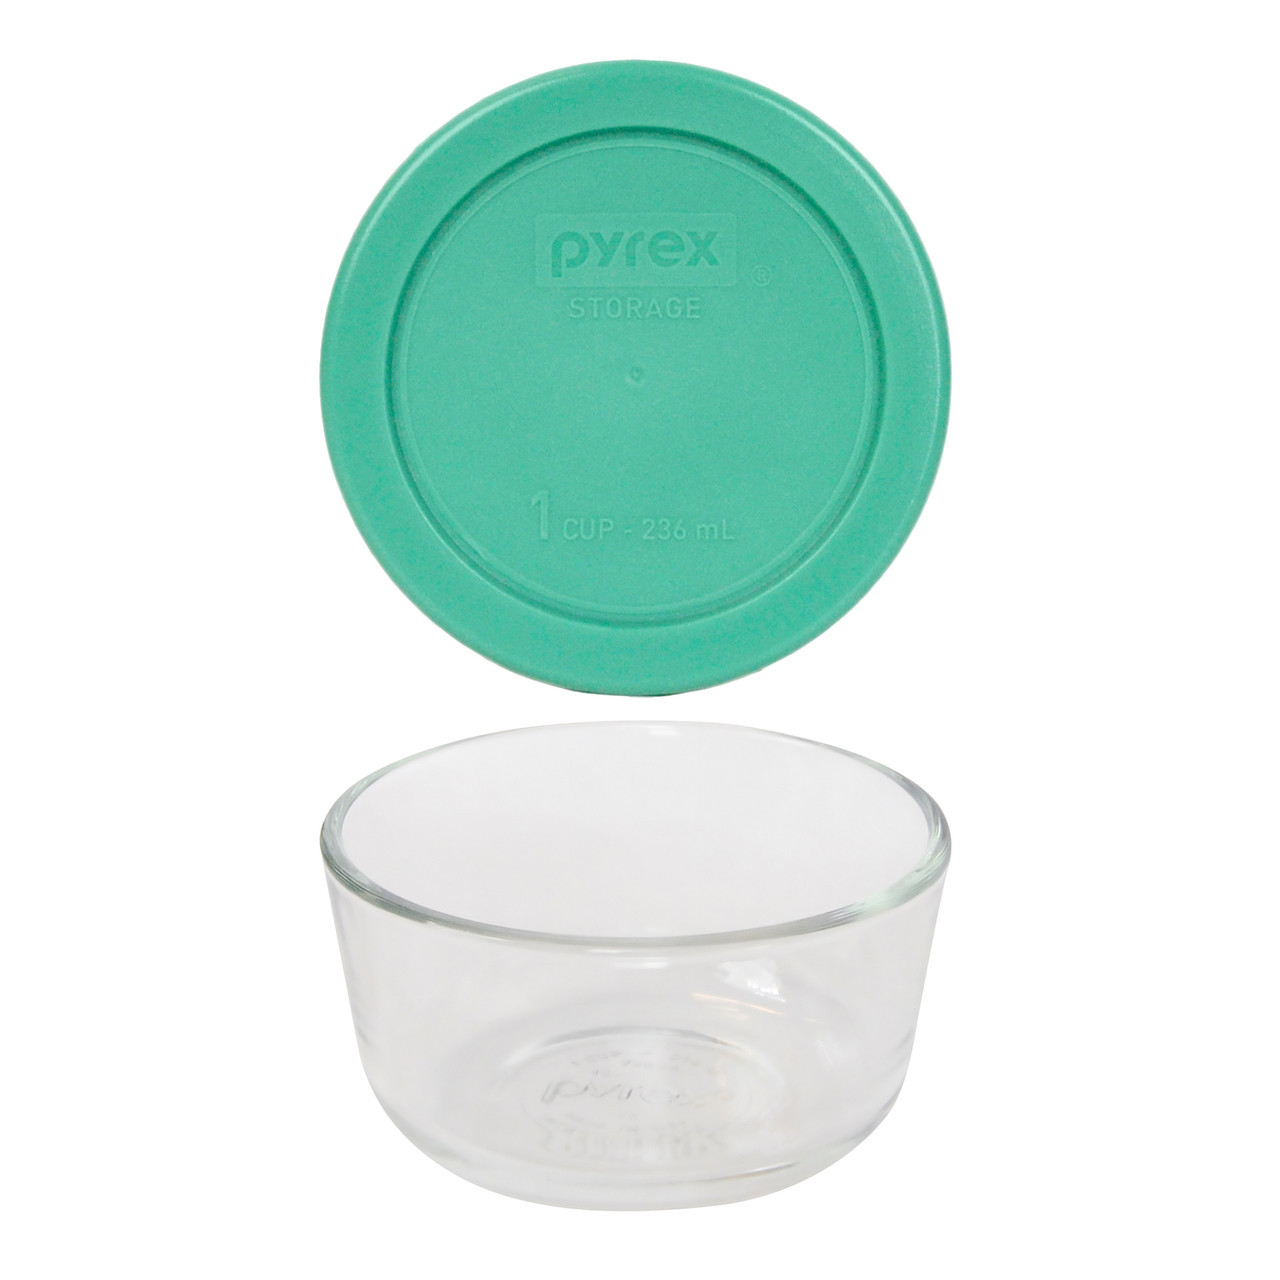 Pyrex (1) 7202 1-Cup Glass Bowl & (1) 7202-PC 1-Cup Lid